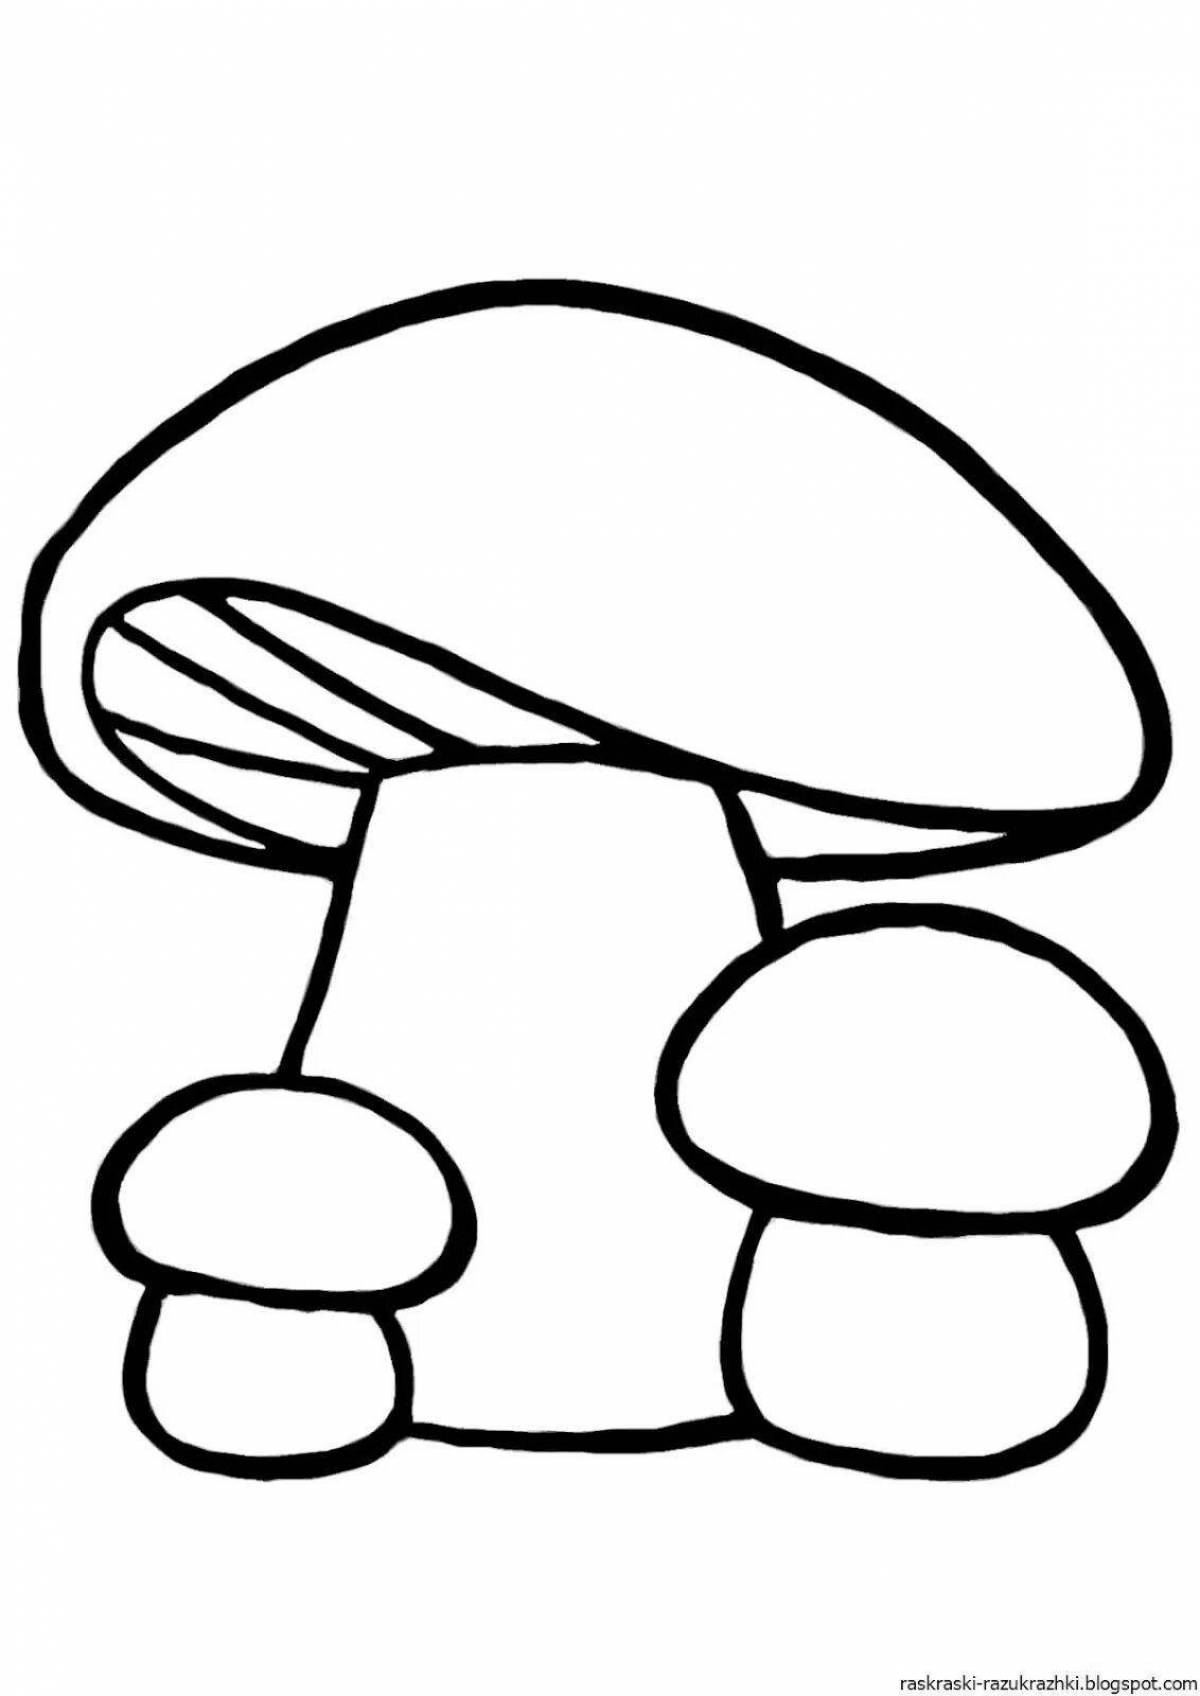 Adorable mushroom coloring page for kids